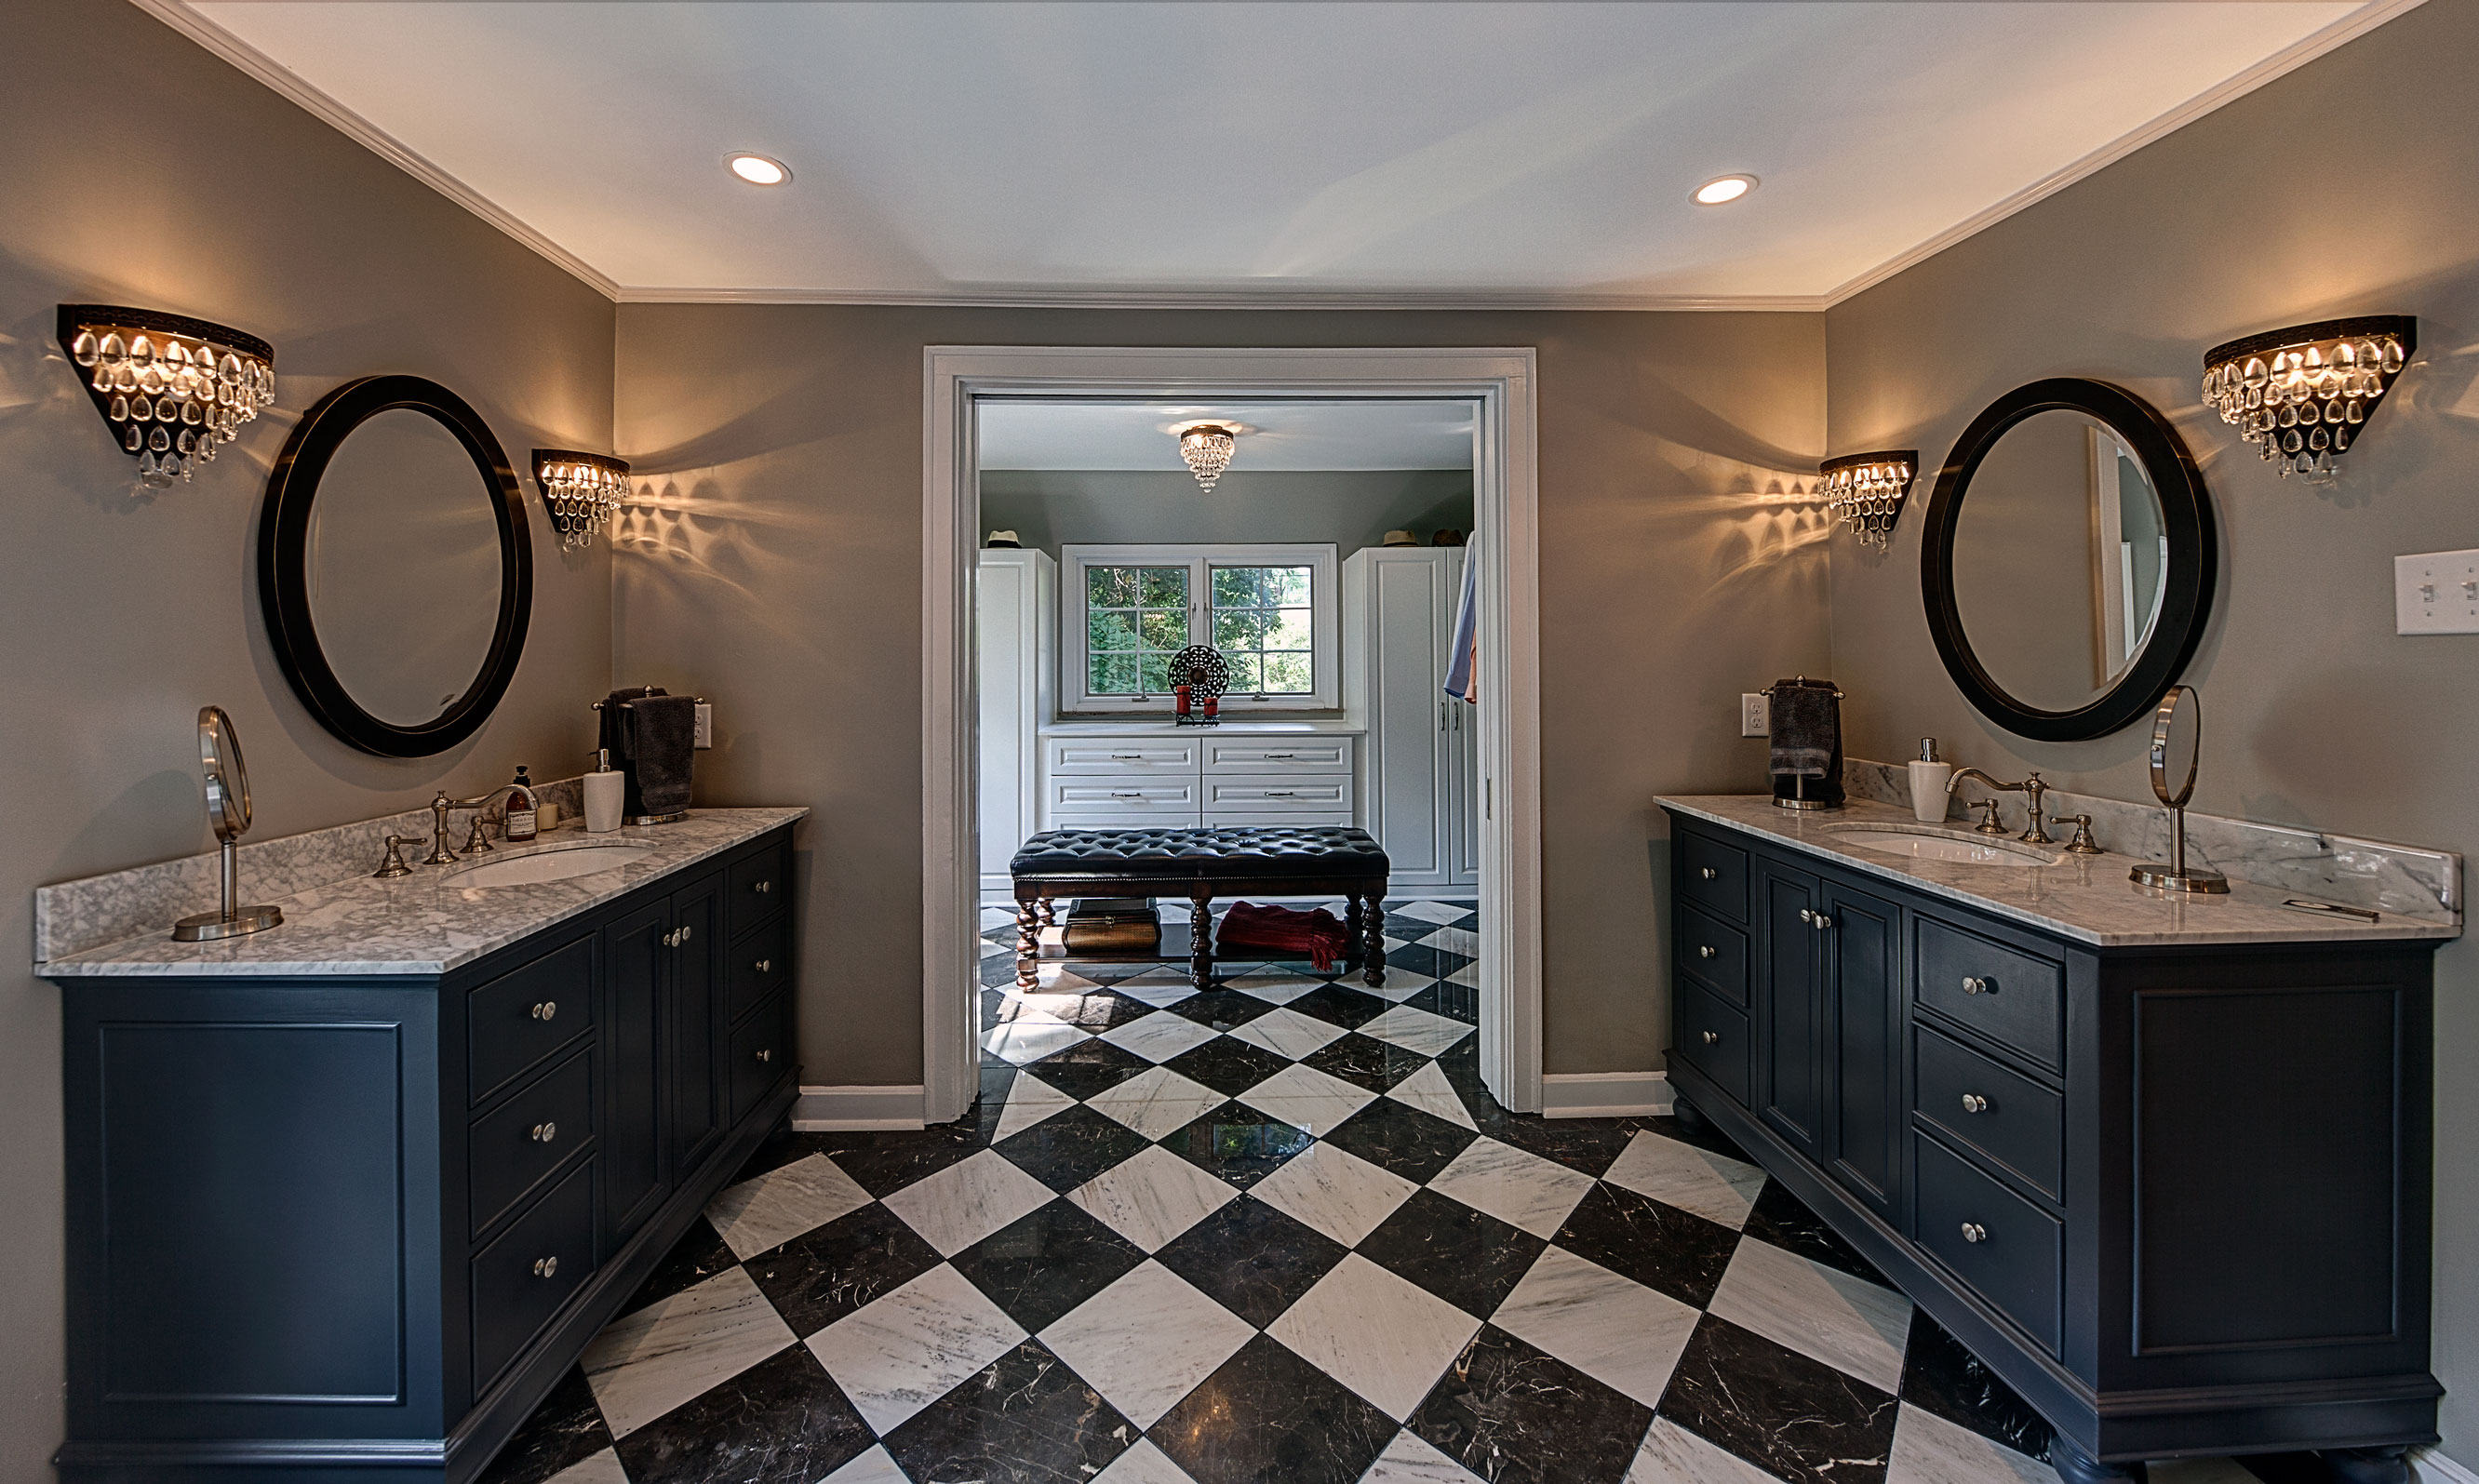 bathroom remodel-checkerboard tile-black and white tile-master closet-vanity cabinets